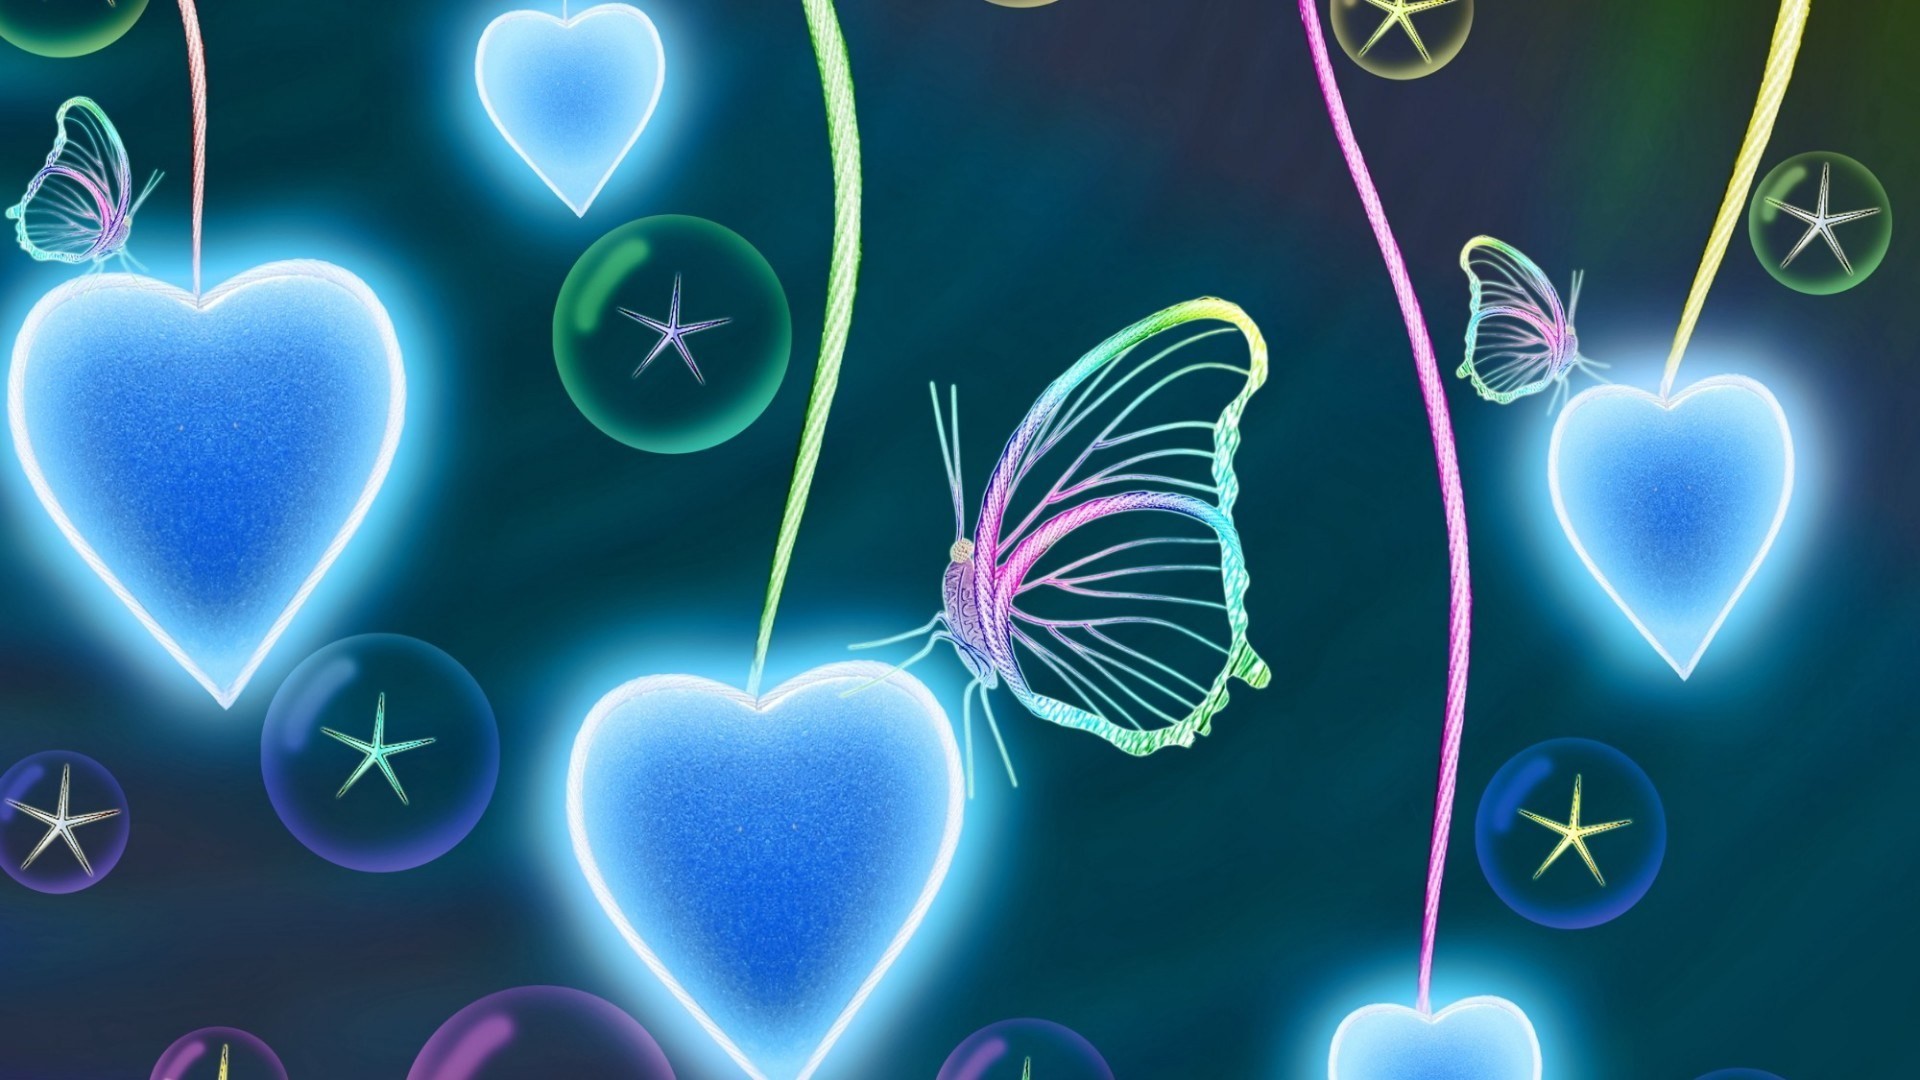 1920x1080 Right Click on this wallpapers: Abstract Butterfly Art #Image to download  and select option "Save image as..."